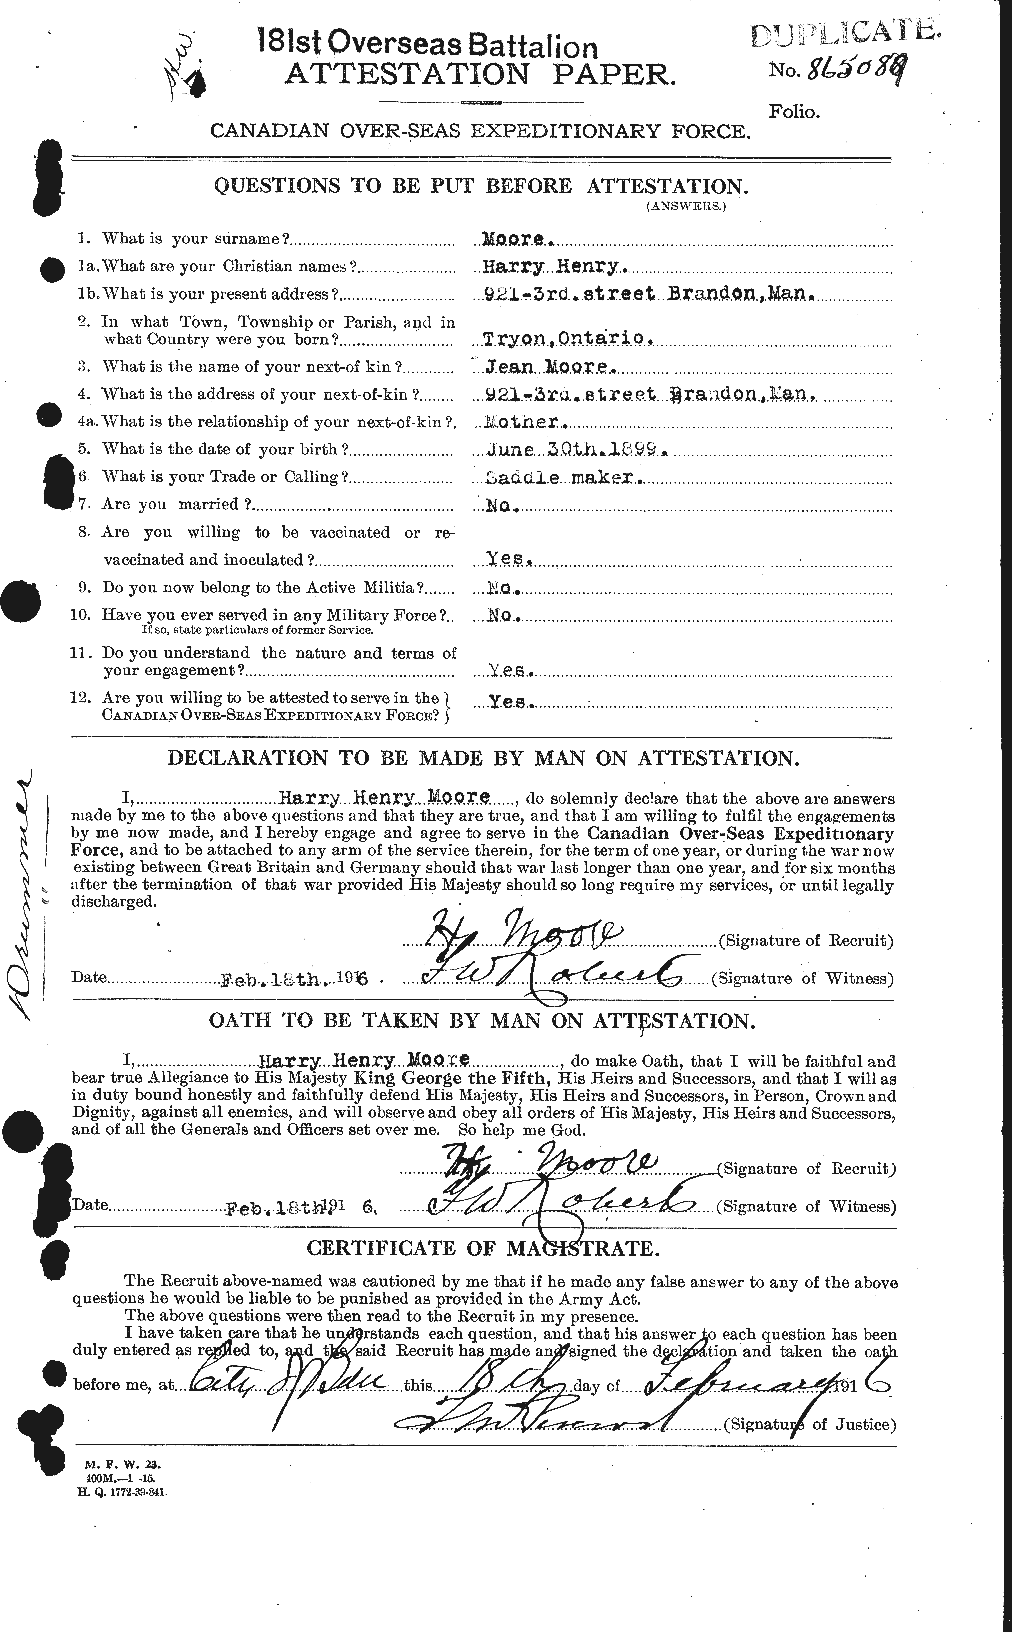 Personnel Records of the First World War - CEF 502083a